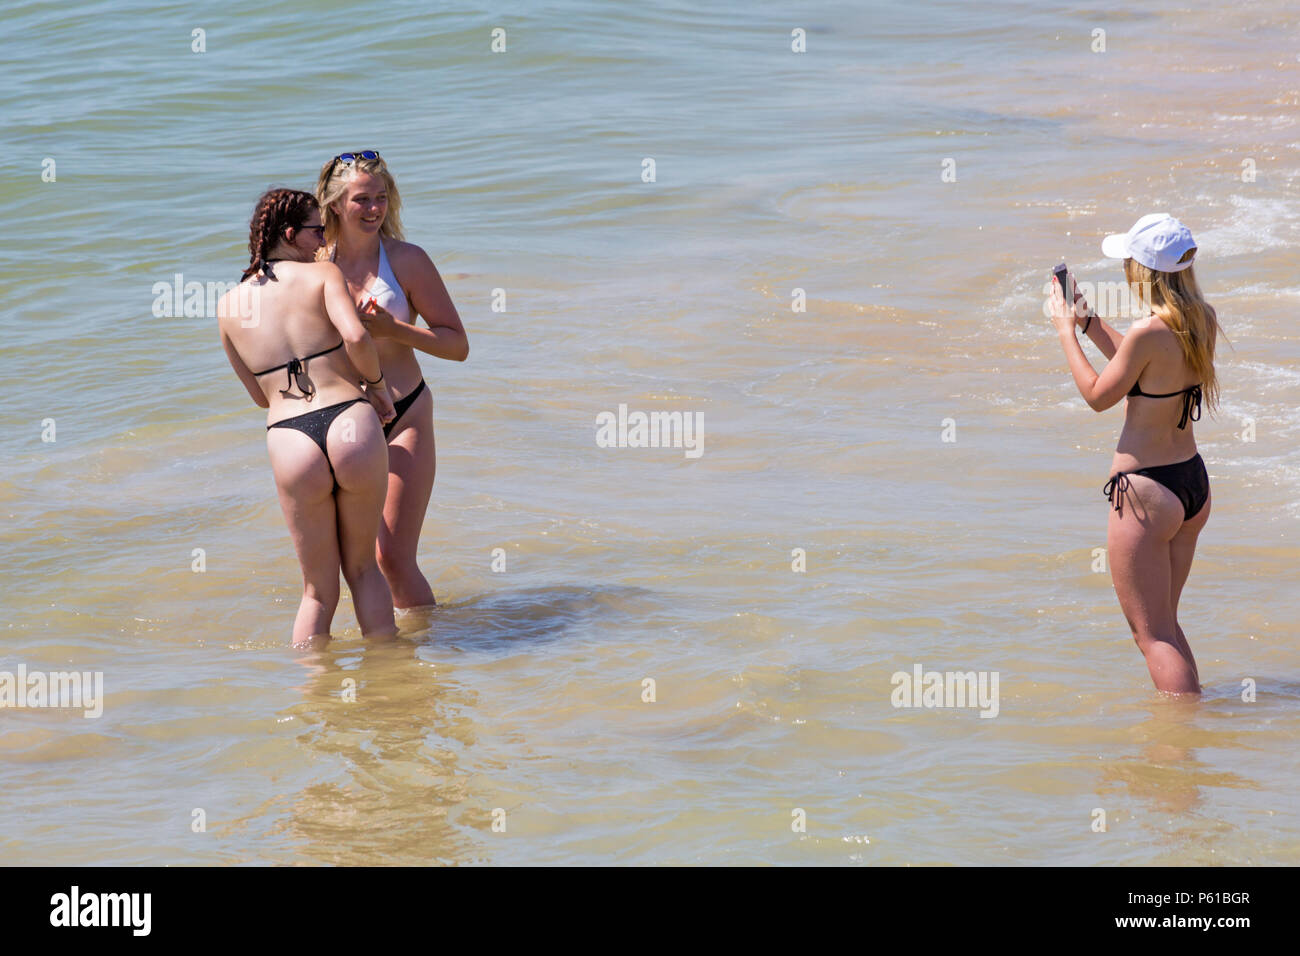 Bournemouth, Dorset, UK. 28th June 2018. UK weather: sunseekers head to the beaches at Bournemouth on another hot sunny day with unbroken blue skies and sunshine. A slight breeze makes the heat more bearable. A group of friends in skimpy bikinis have fun playing in the sea and taking photos. Credit: Carolyn Jenkins/Alamy Live News Stock Photo